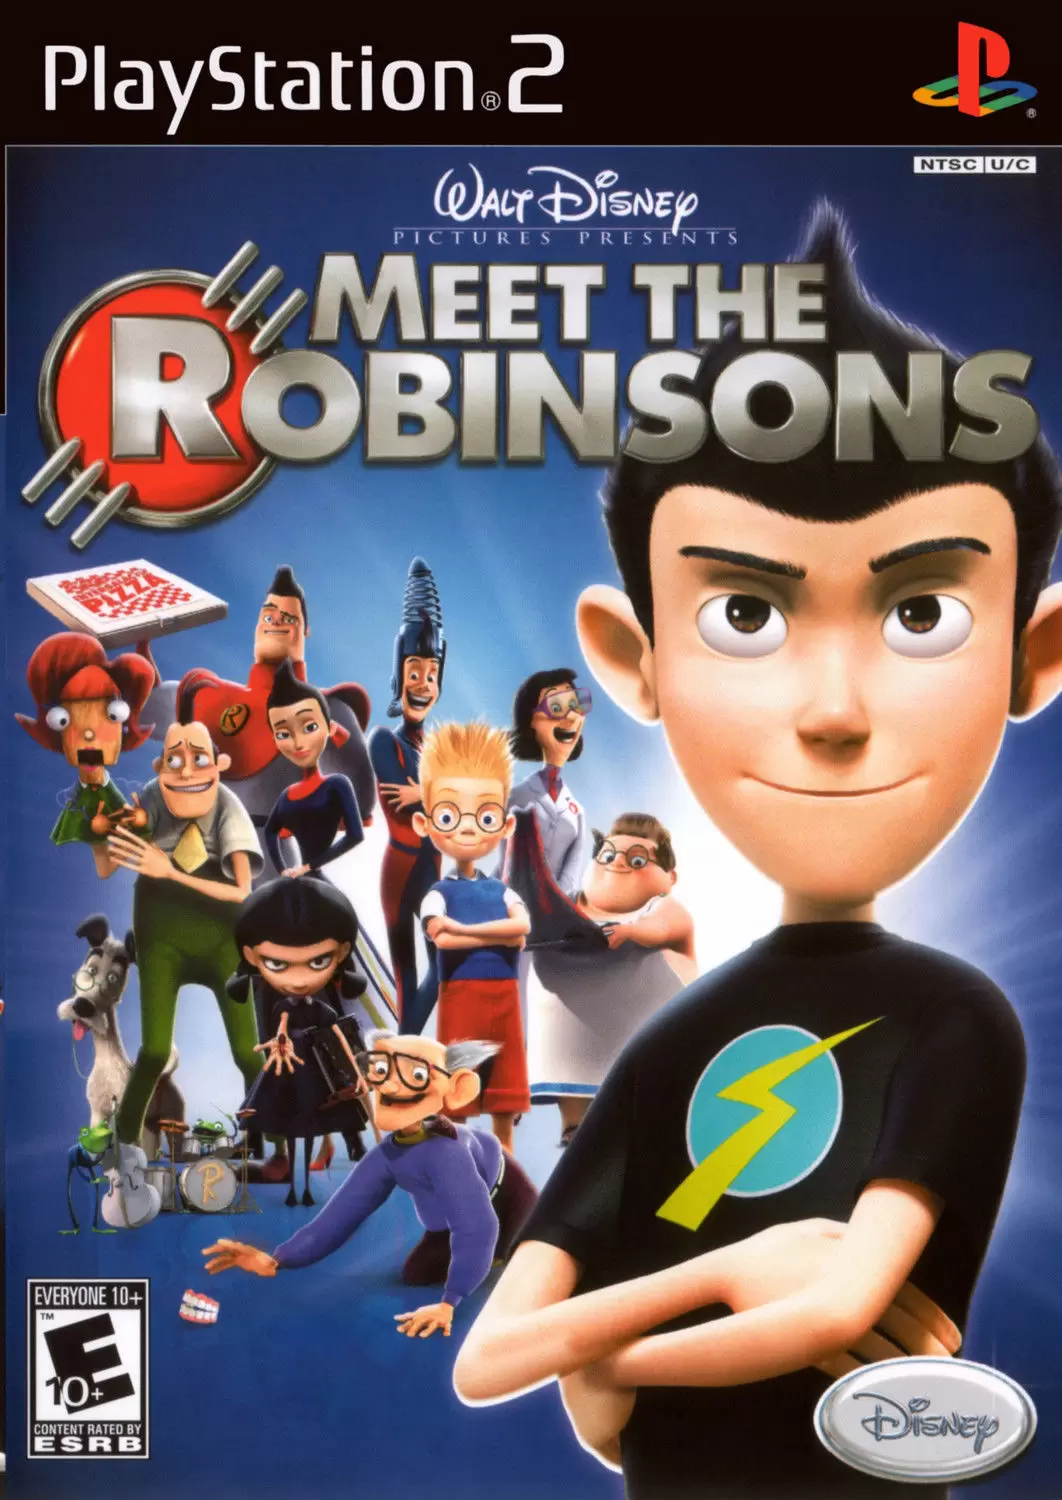 PS2 Games - Meet the Robinsons